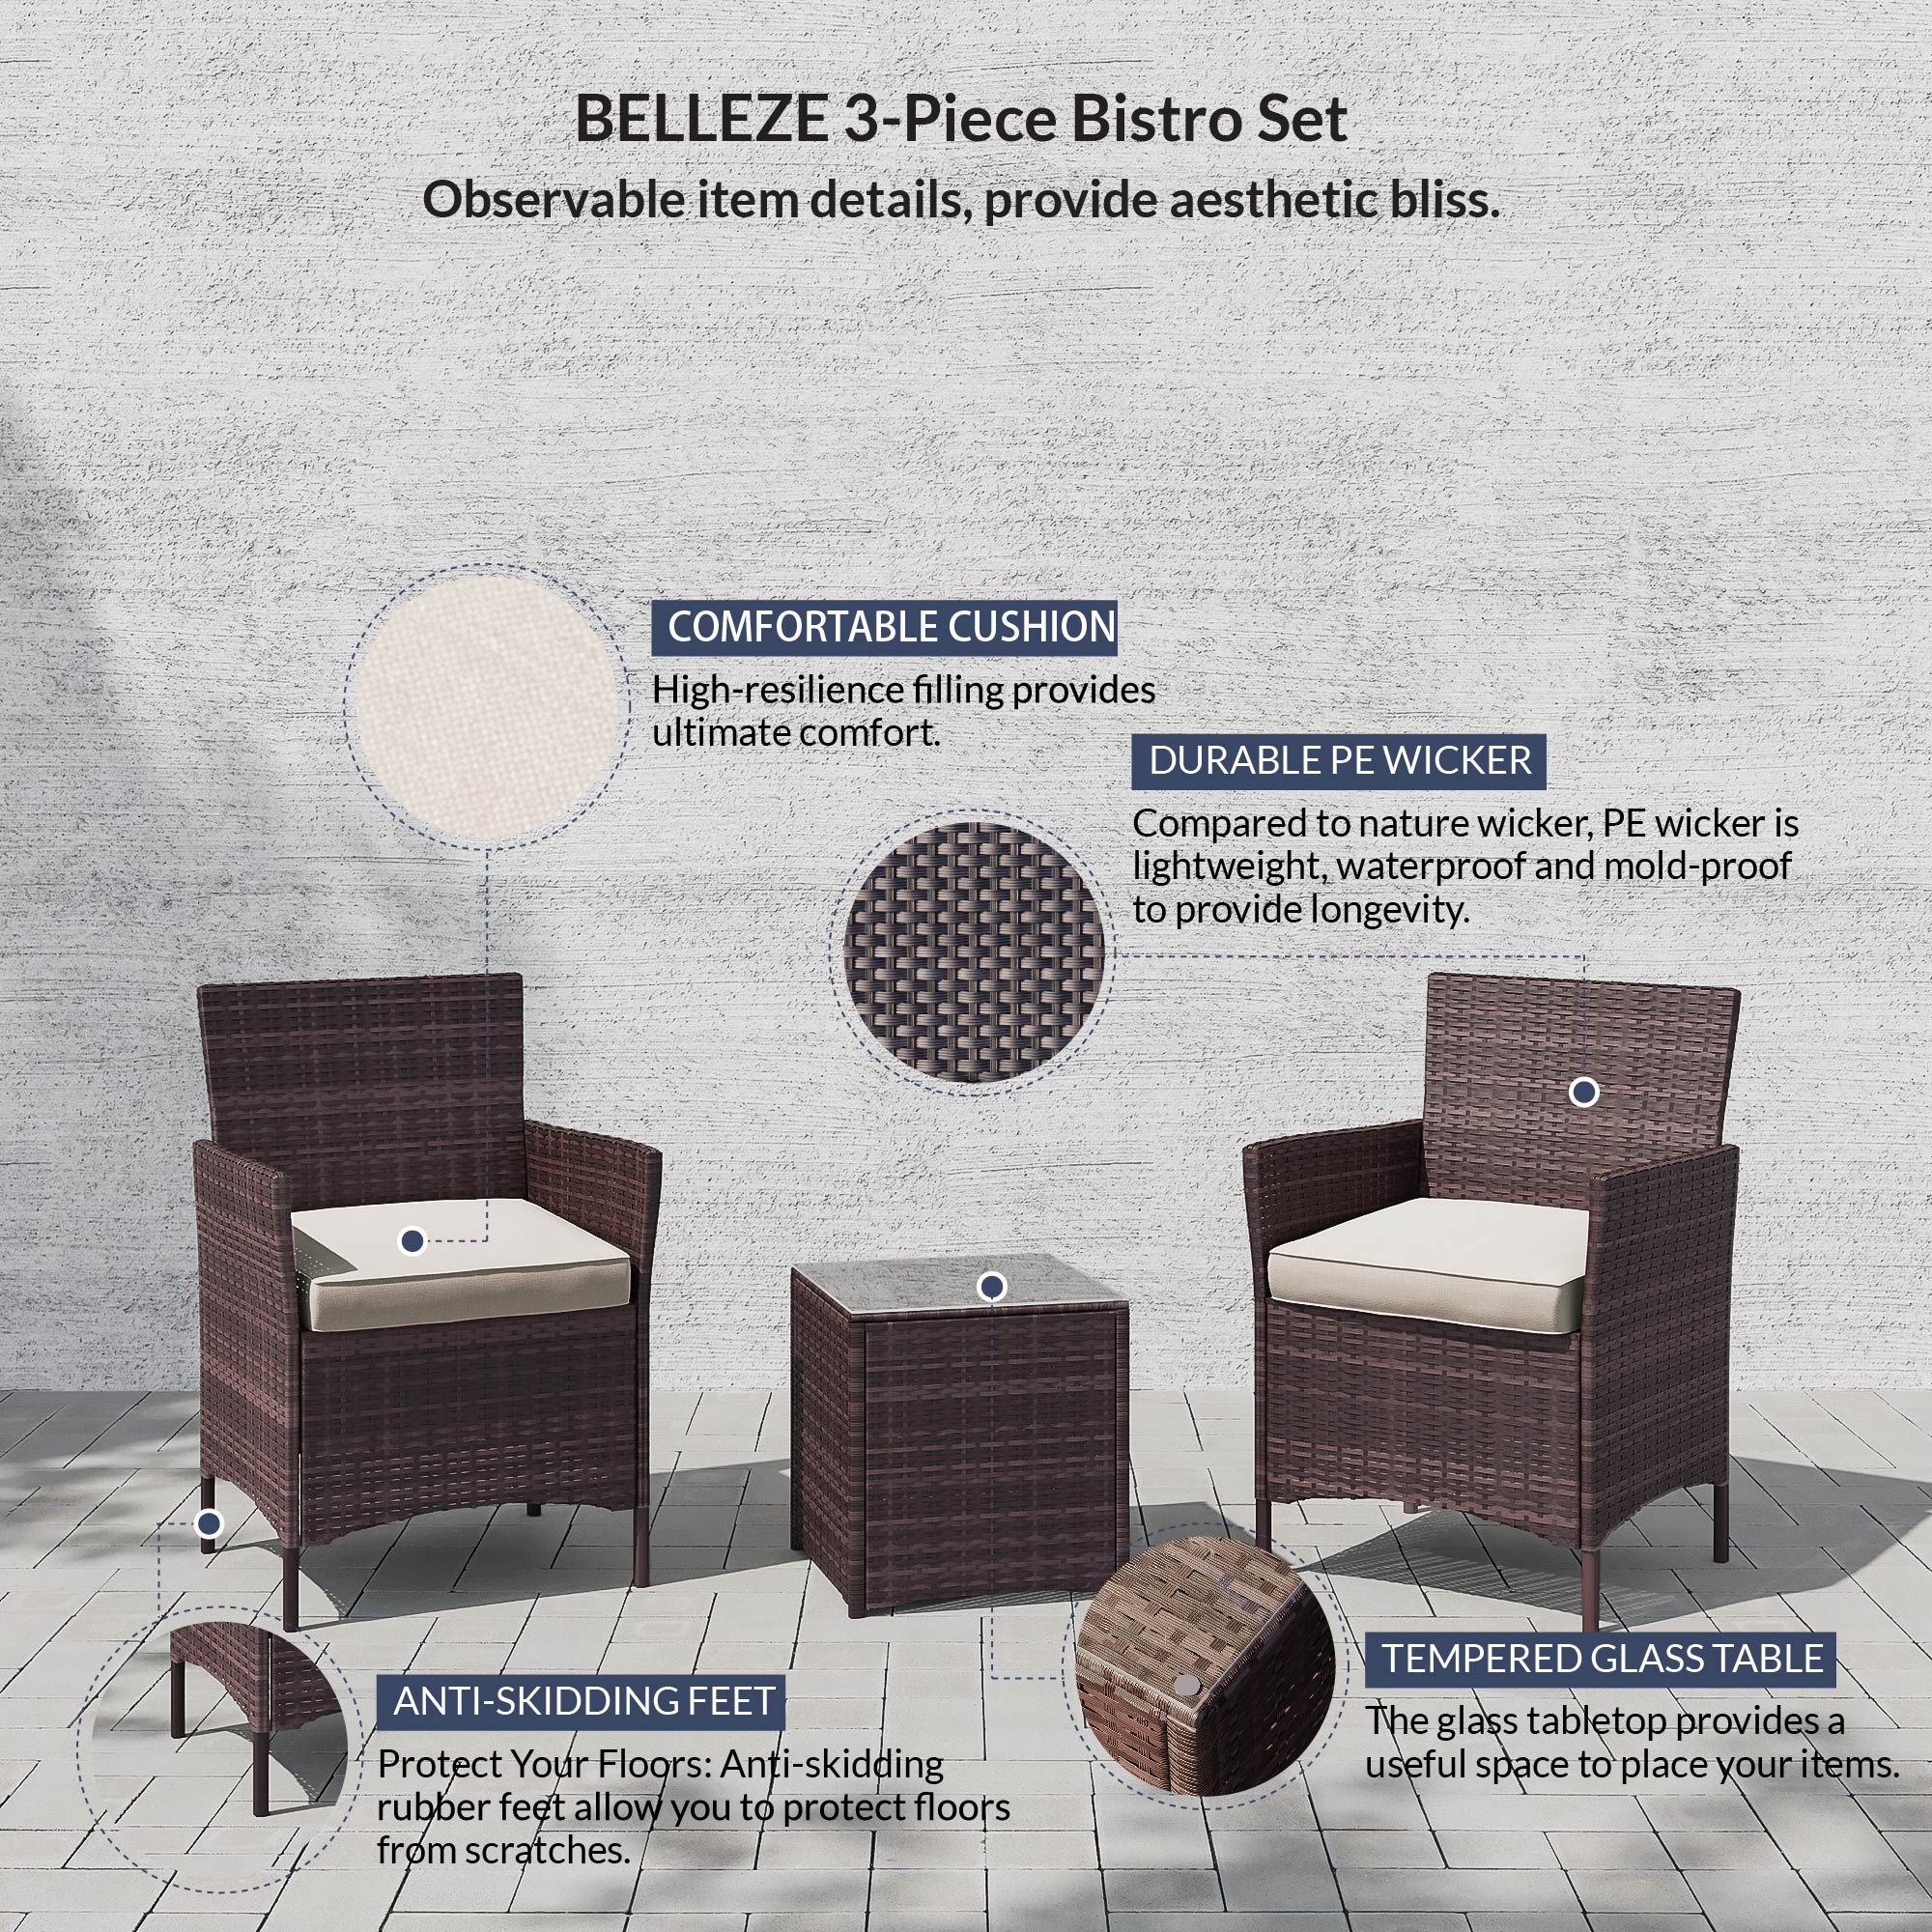 BELLEZE Wicker Furniture Outdoor Set 3 Piece Patio Outdoor Rattan Patio Set Two Chairs One Glass Table Brown - image 4 of 6